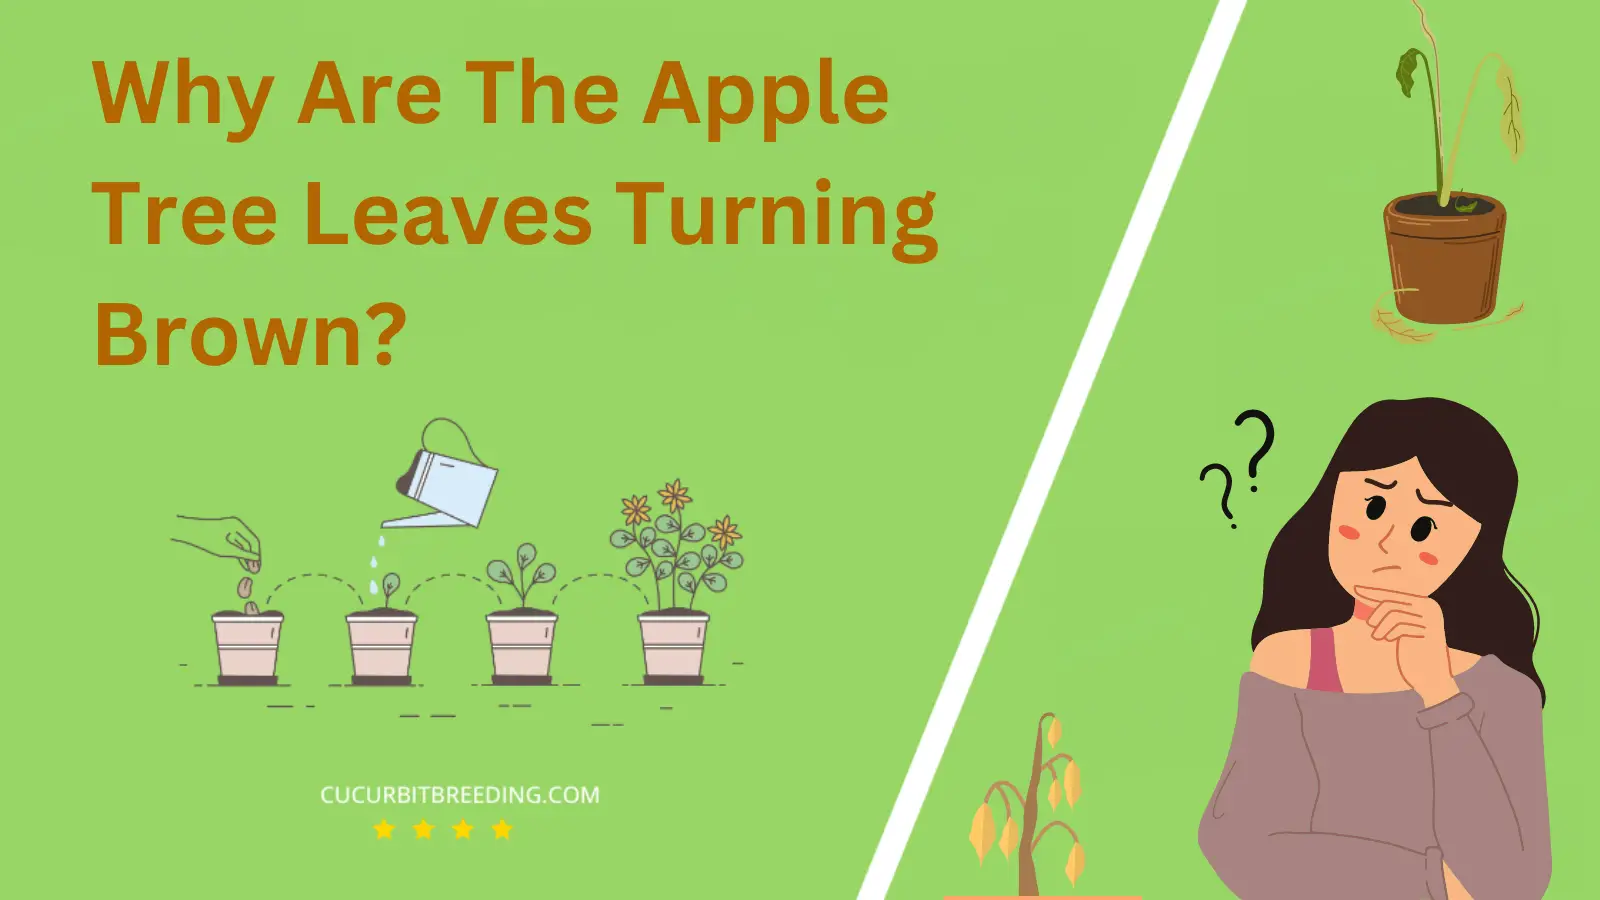 Why Are The Apple Tree Leaves Turning Brown